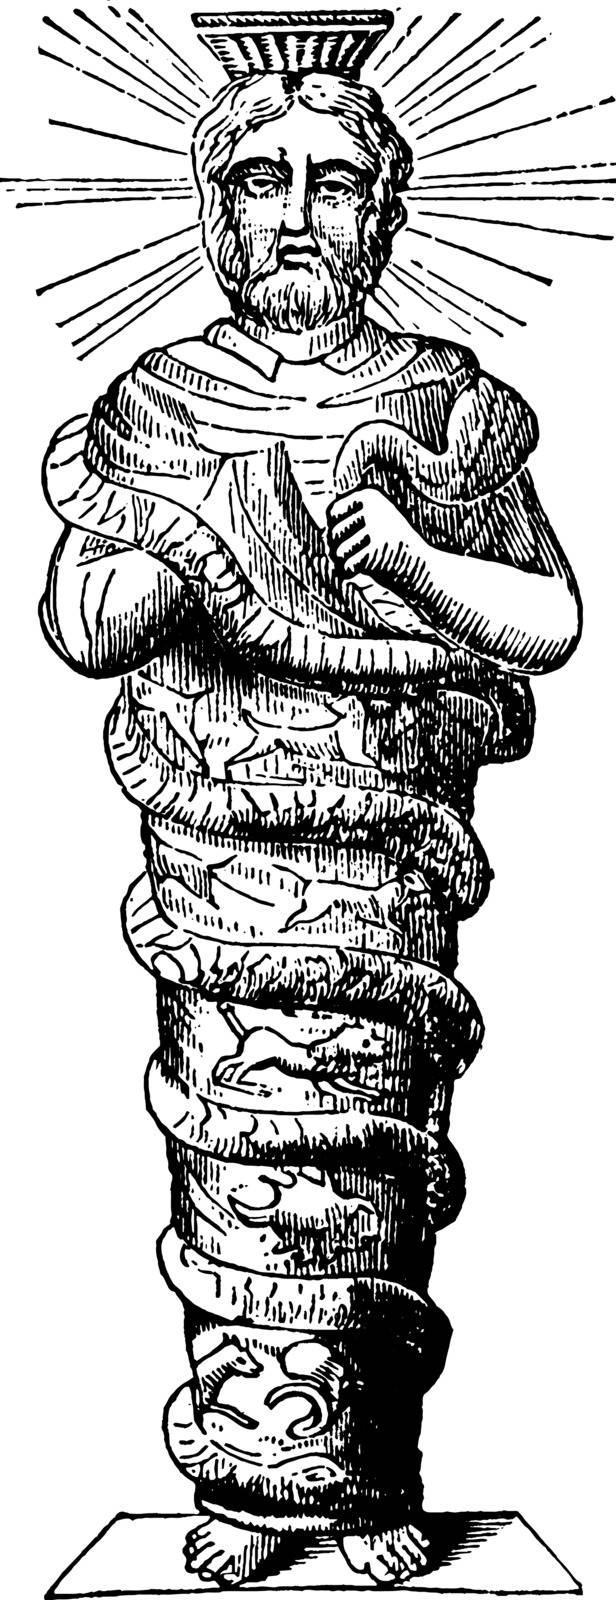 In this figure a person has killed up the hands from the snake's foundation, vintage line drawing or engraving illustration.